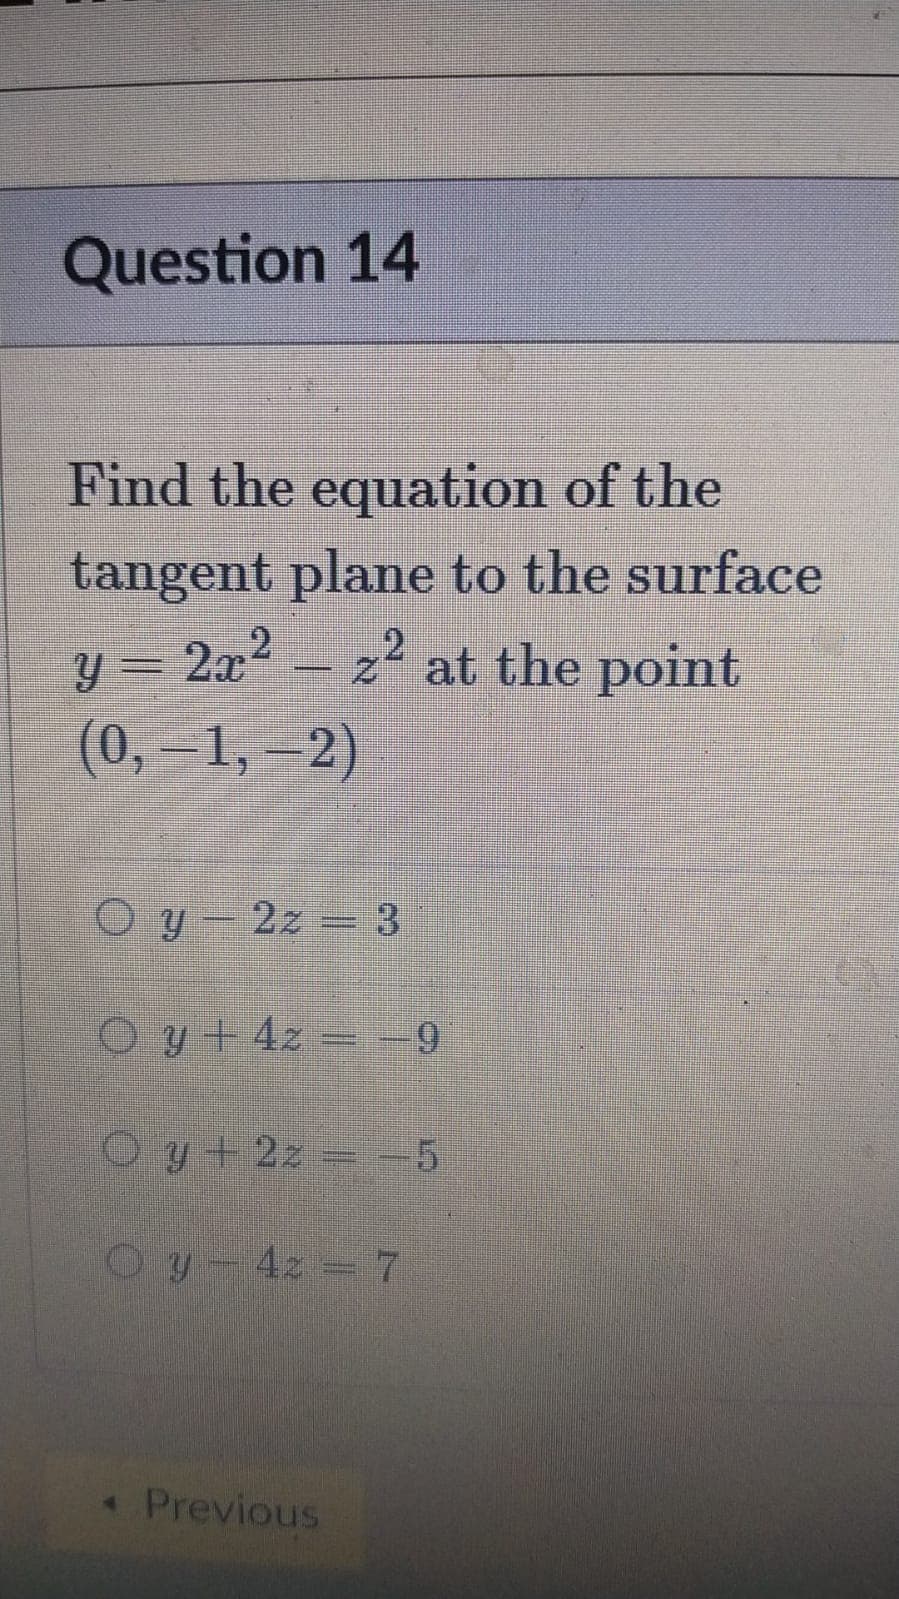 Question 14
Find the equation of the
tangent plane to the surface
y = 2x - z at the point
(0, 1,-2)
O y- 2z = 3
O y + 4z = -9
Oy+ 2z -5
Oy-4z 7
Previous
